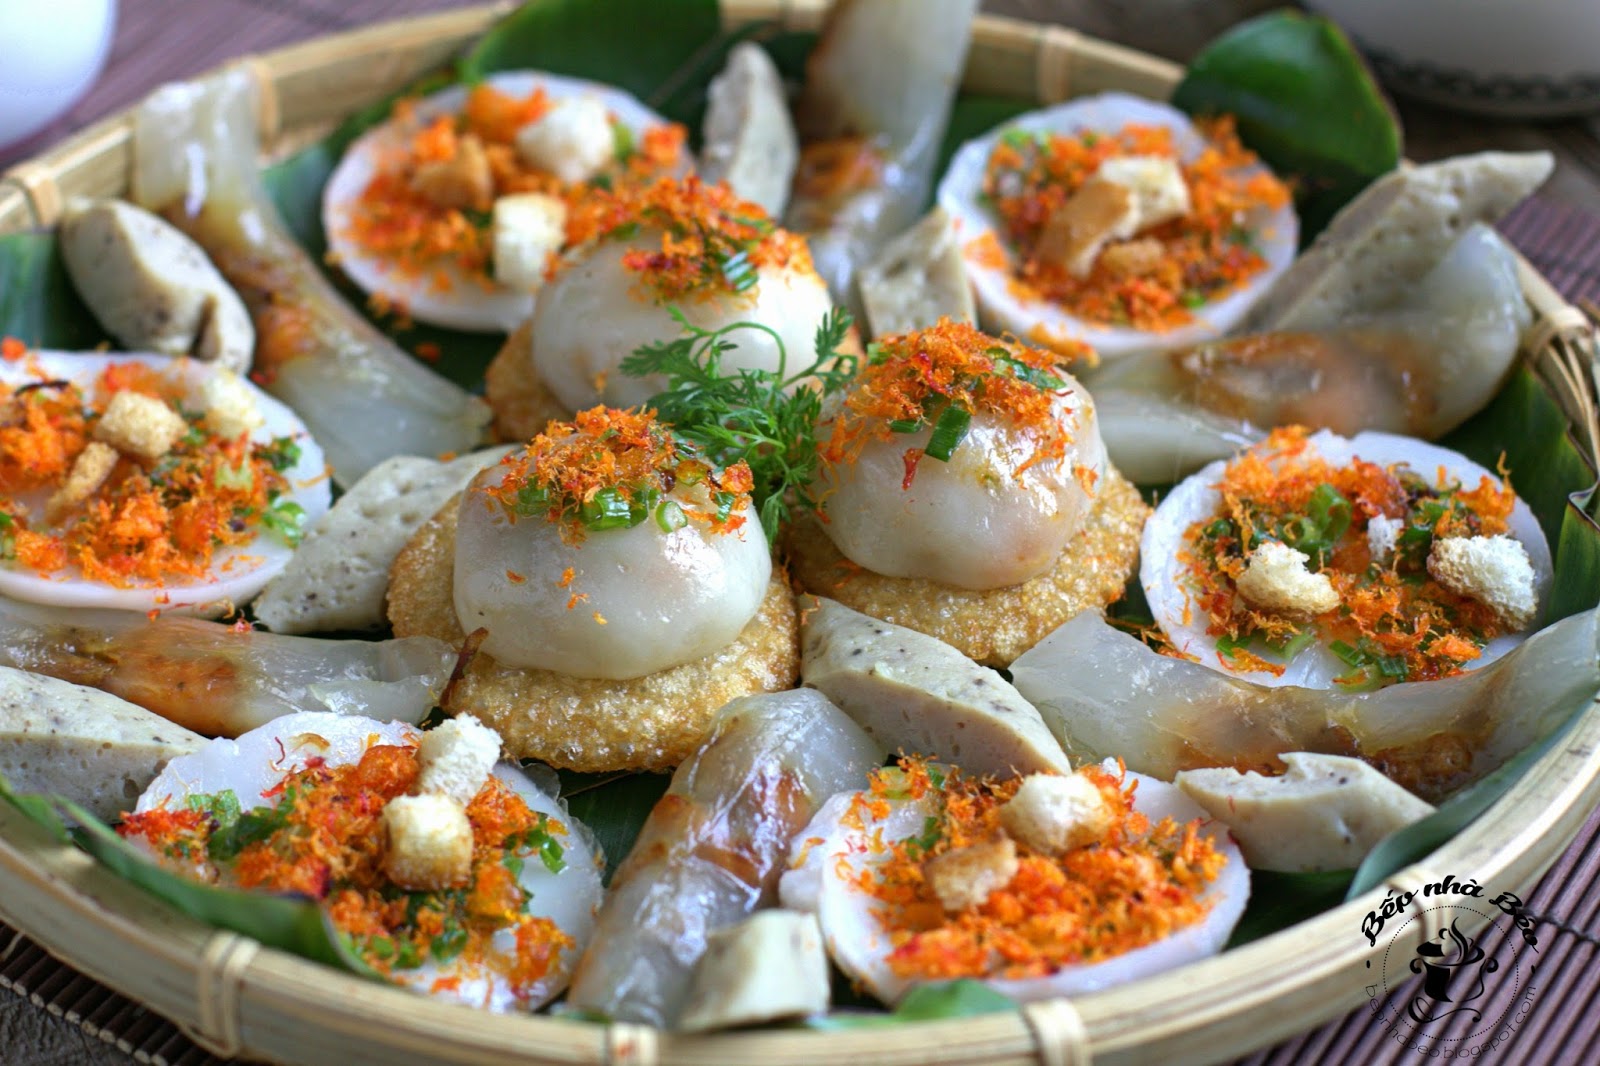 Best Foods To Eat For Your Vietnam Culinary Tour